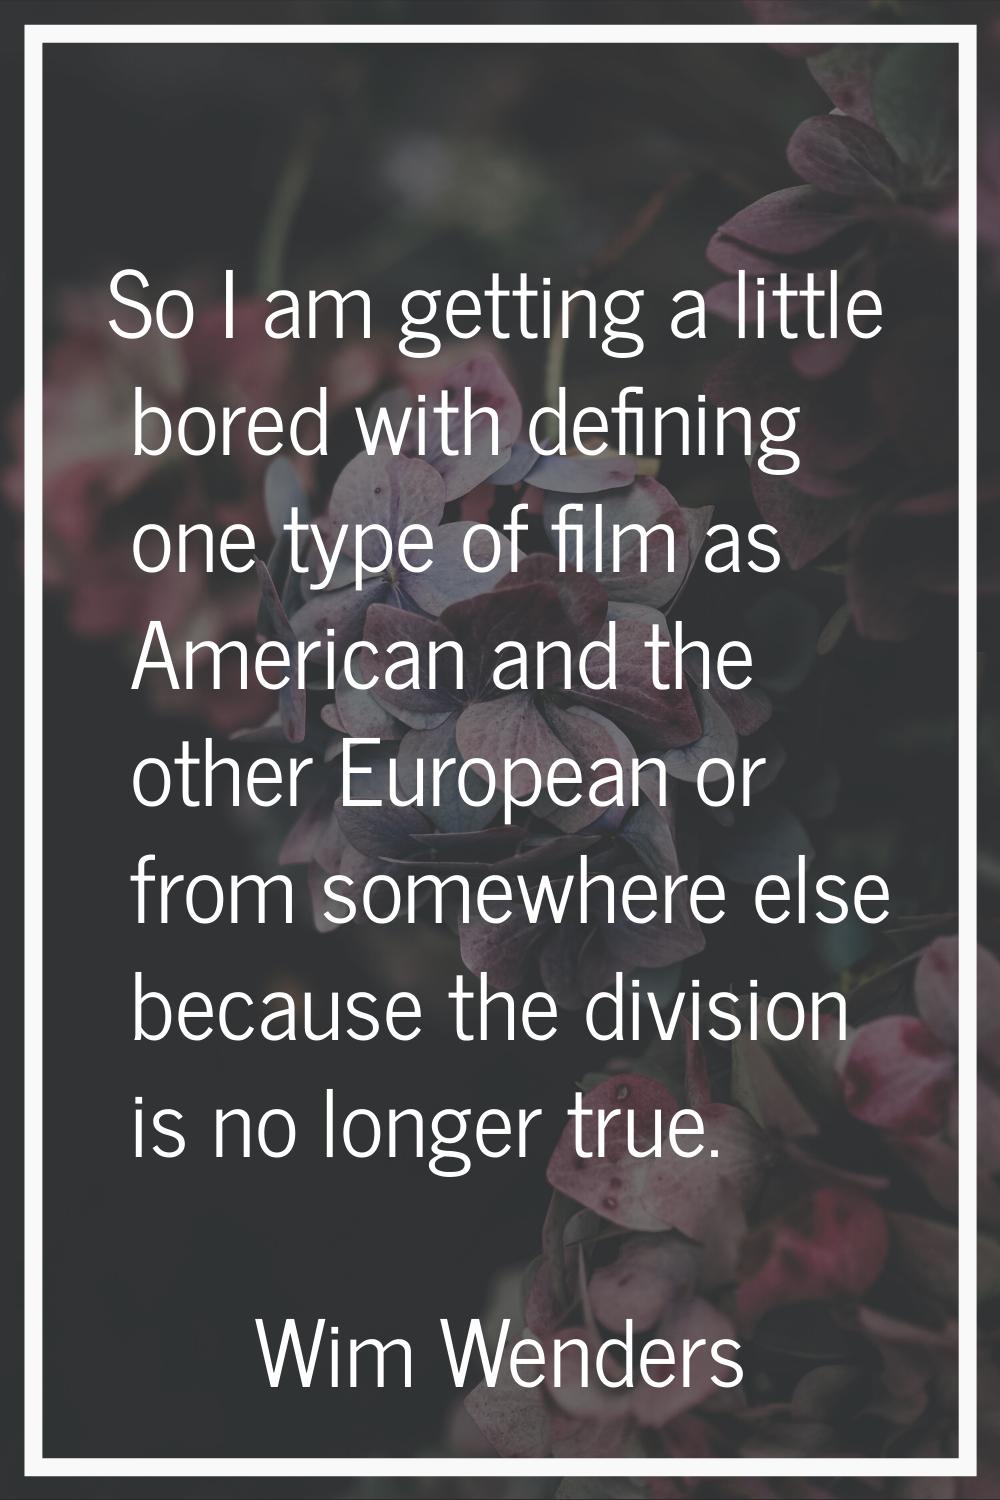 So I am getting a little bored with defining one type of film as American and the other European or